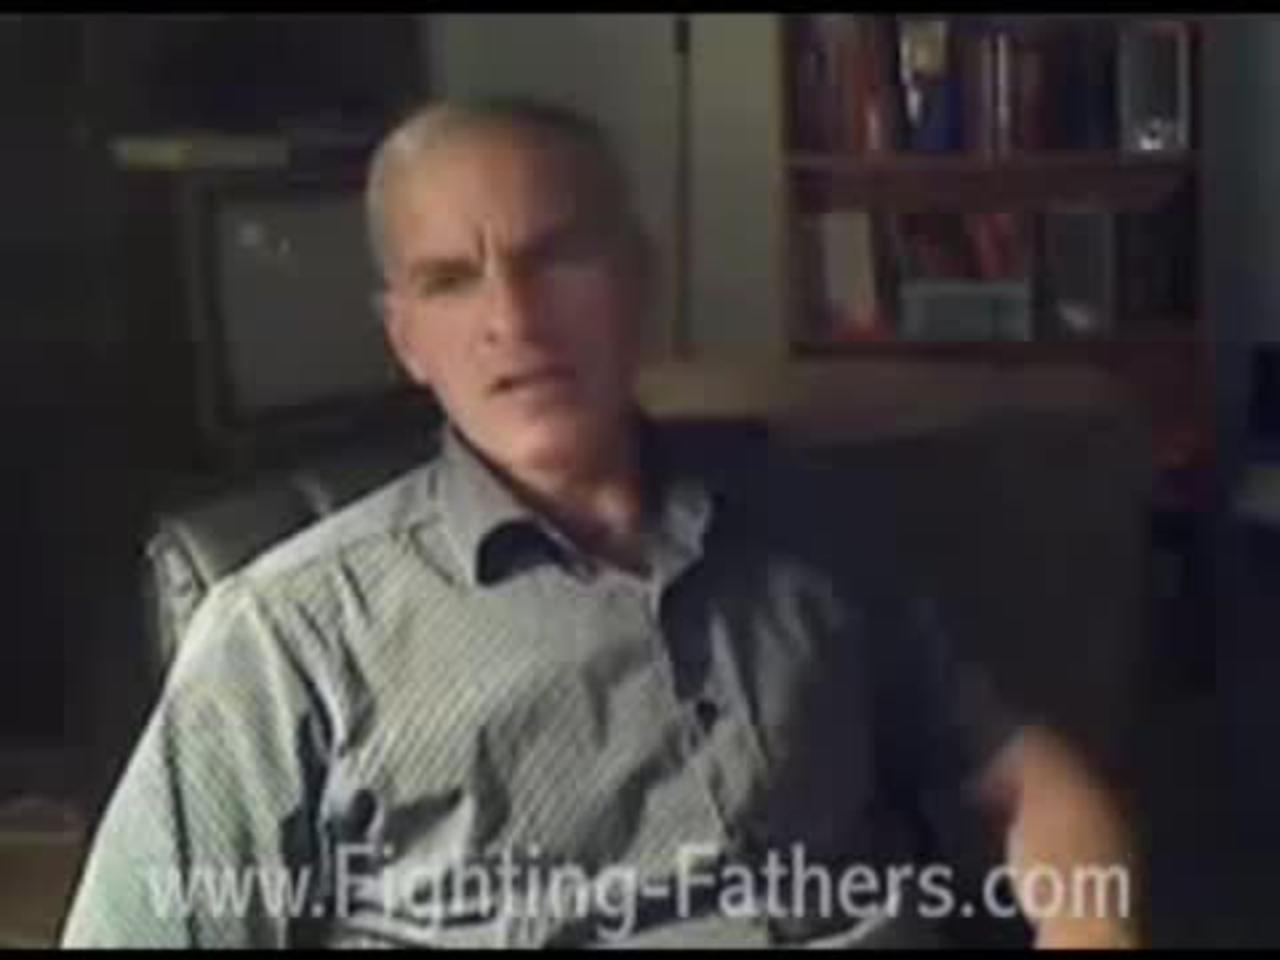 Norman Finkelstein visits Holy Trinity (3/4): A Worthwhile Cause